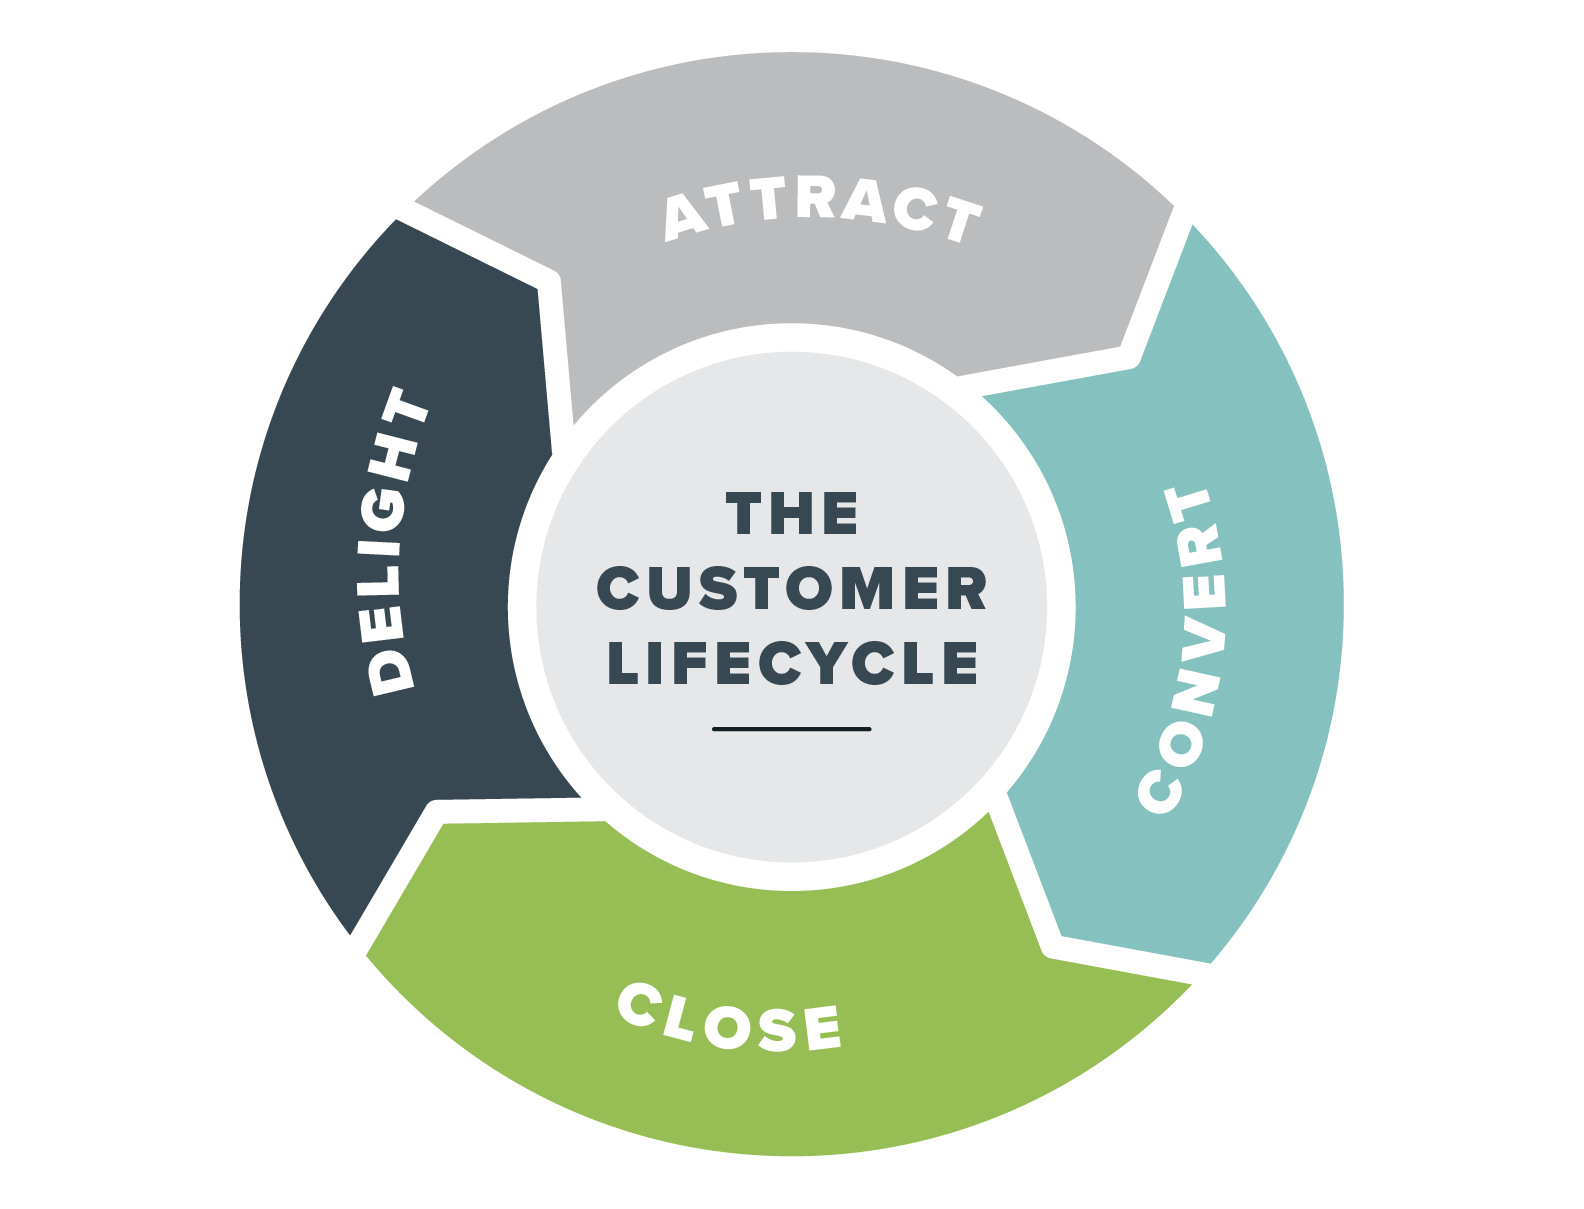 The customer lifecycle